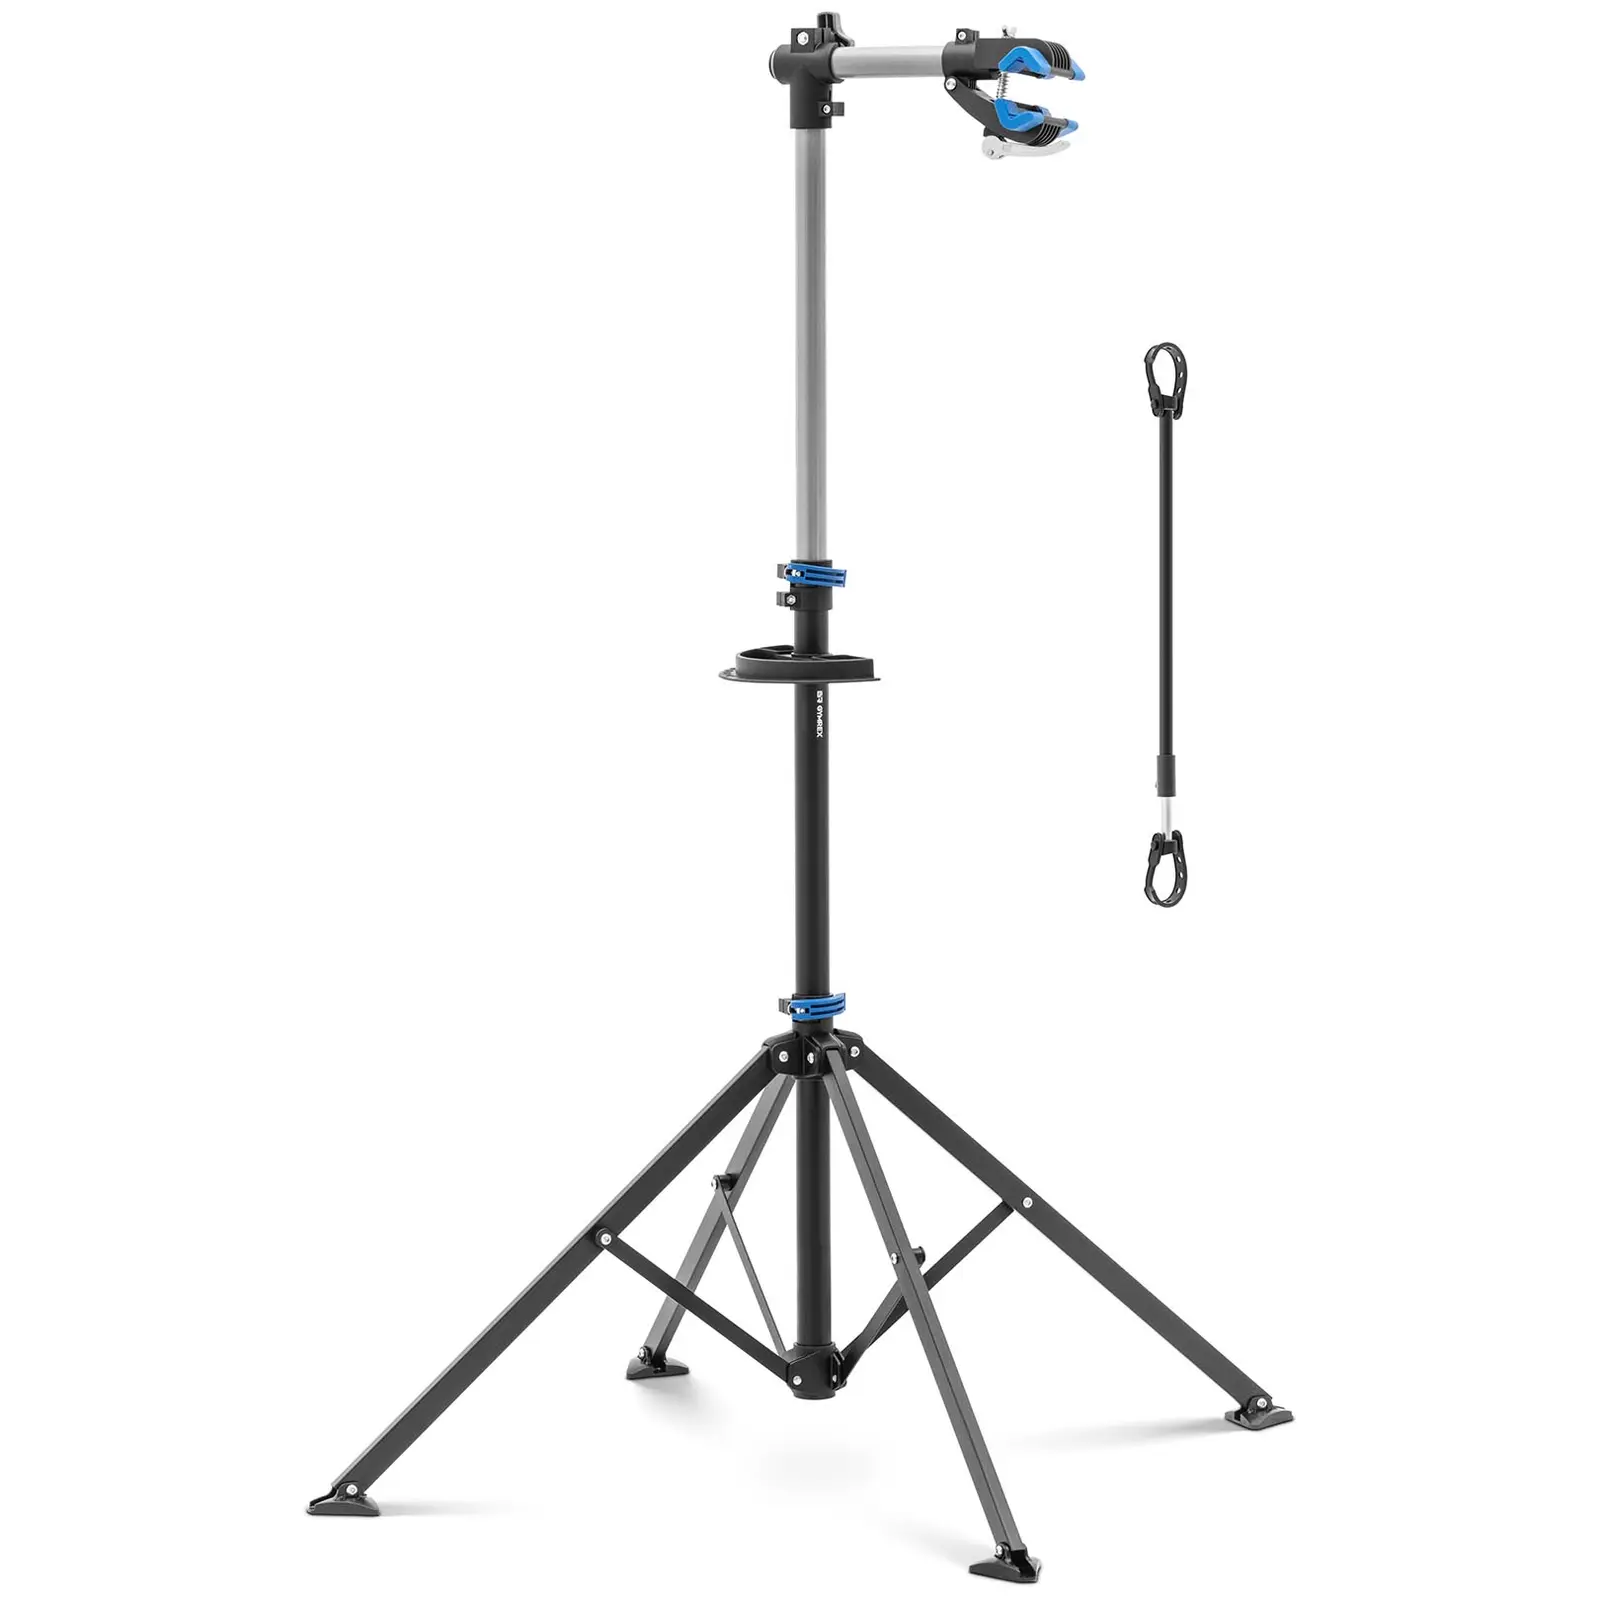 Bicycle Assembly Stand - 1080 - 1900 mm - foldable - up to 25 kg - 4 Legs